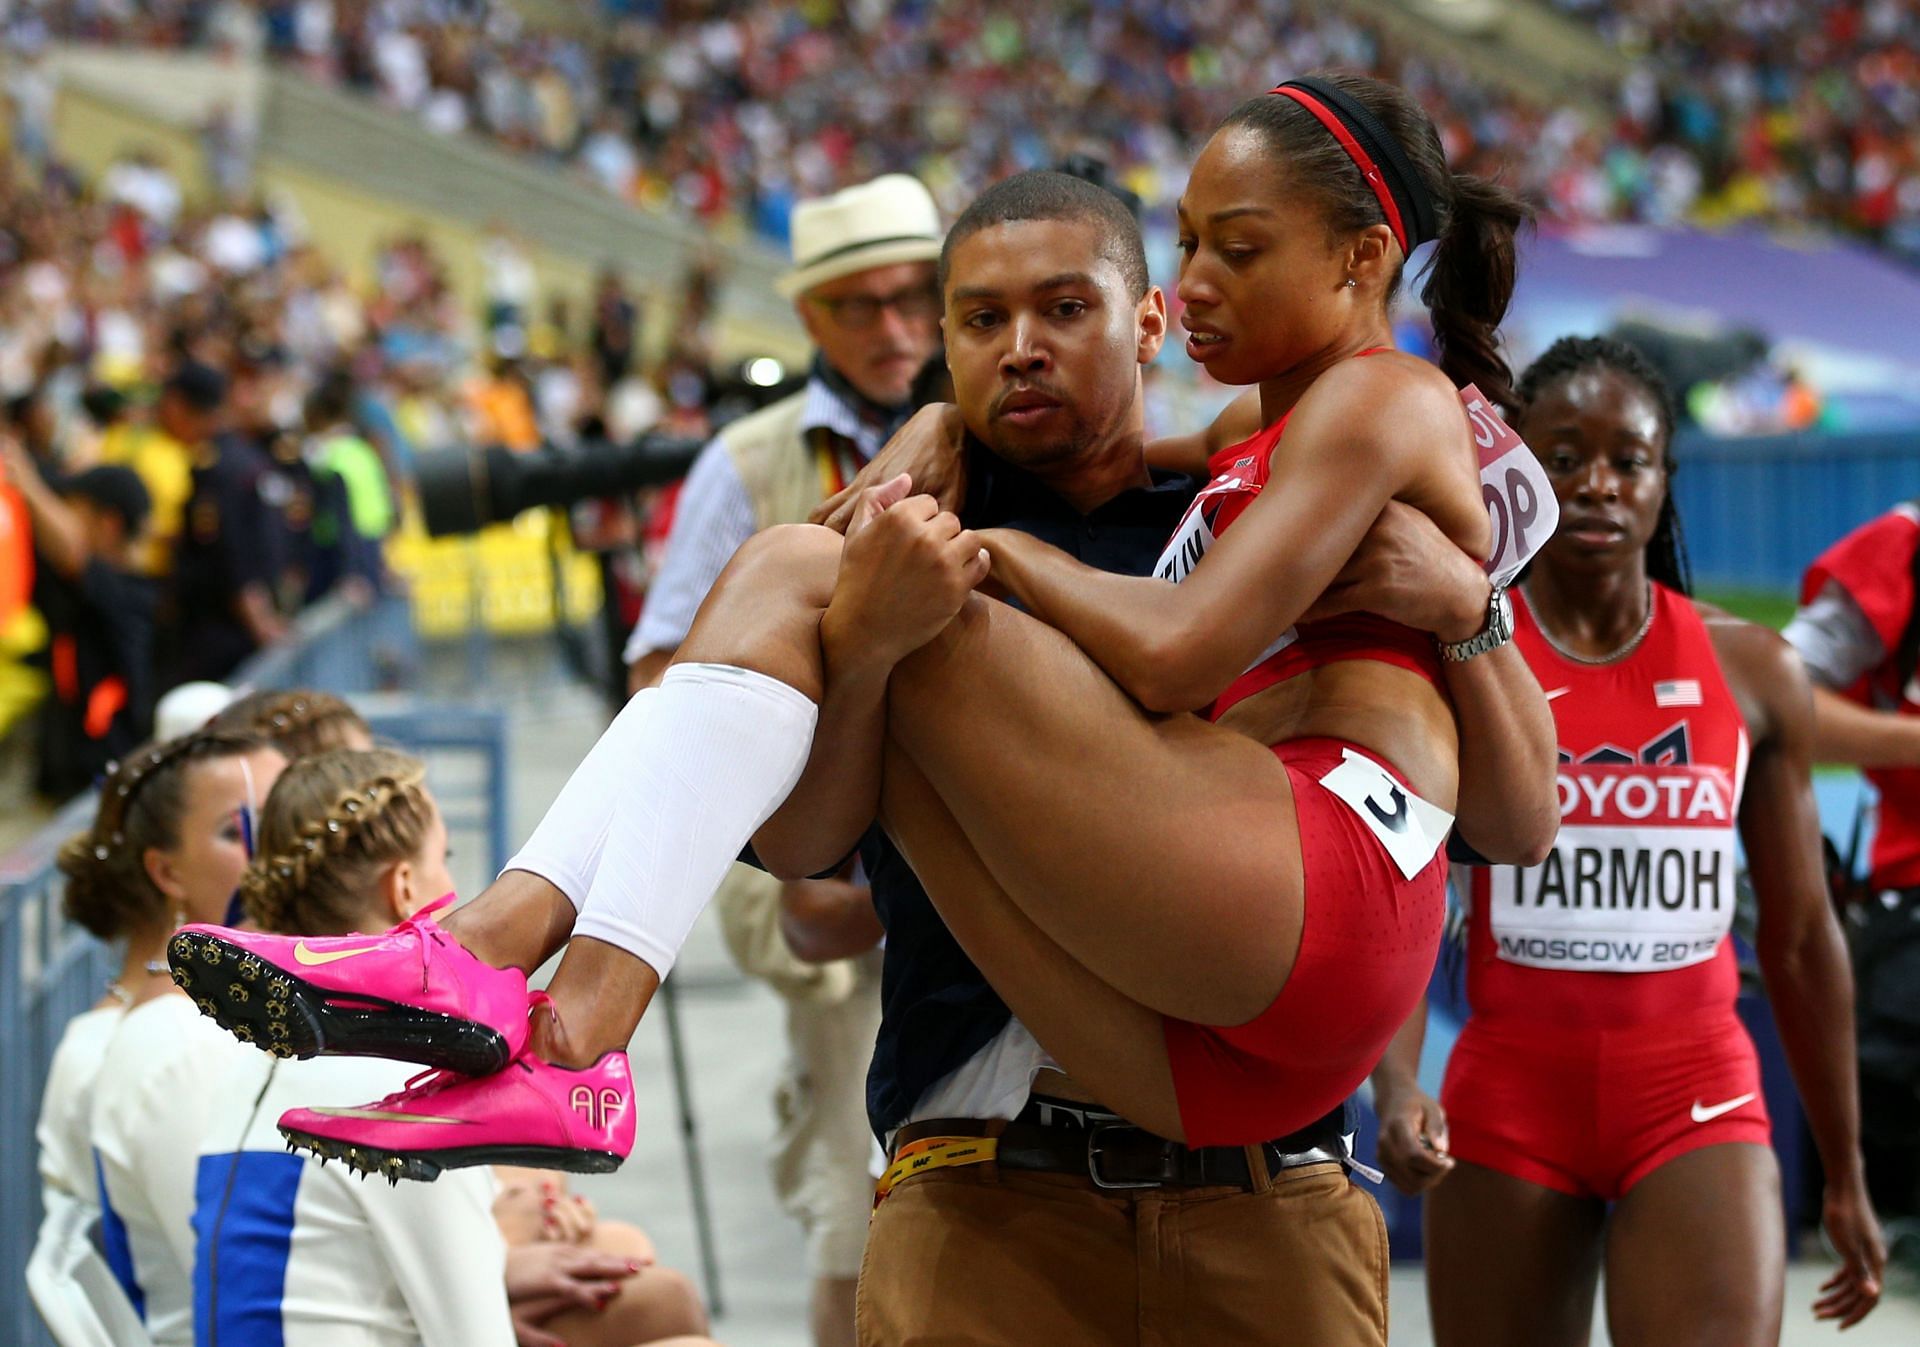 Allyson Felix being carried by her brother at the 2013 World Championships in Moscow, Russia